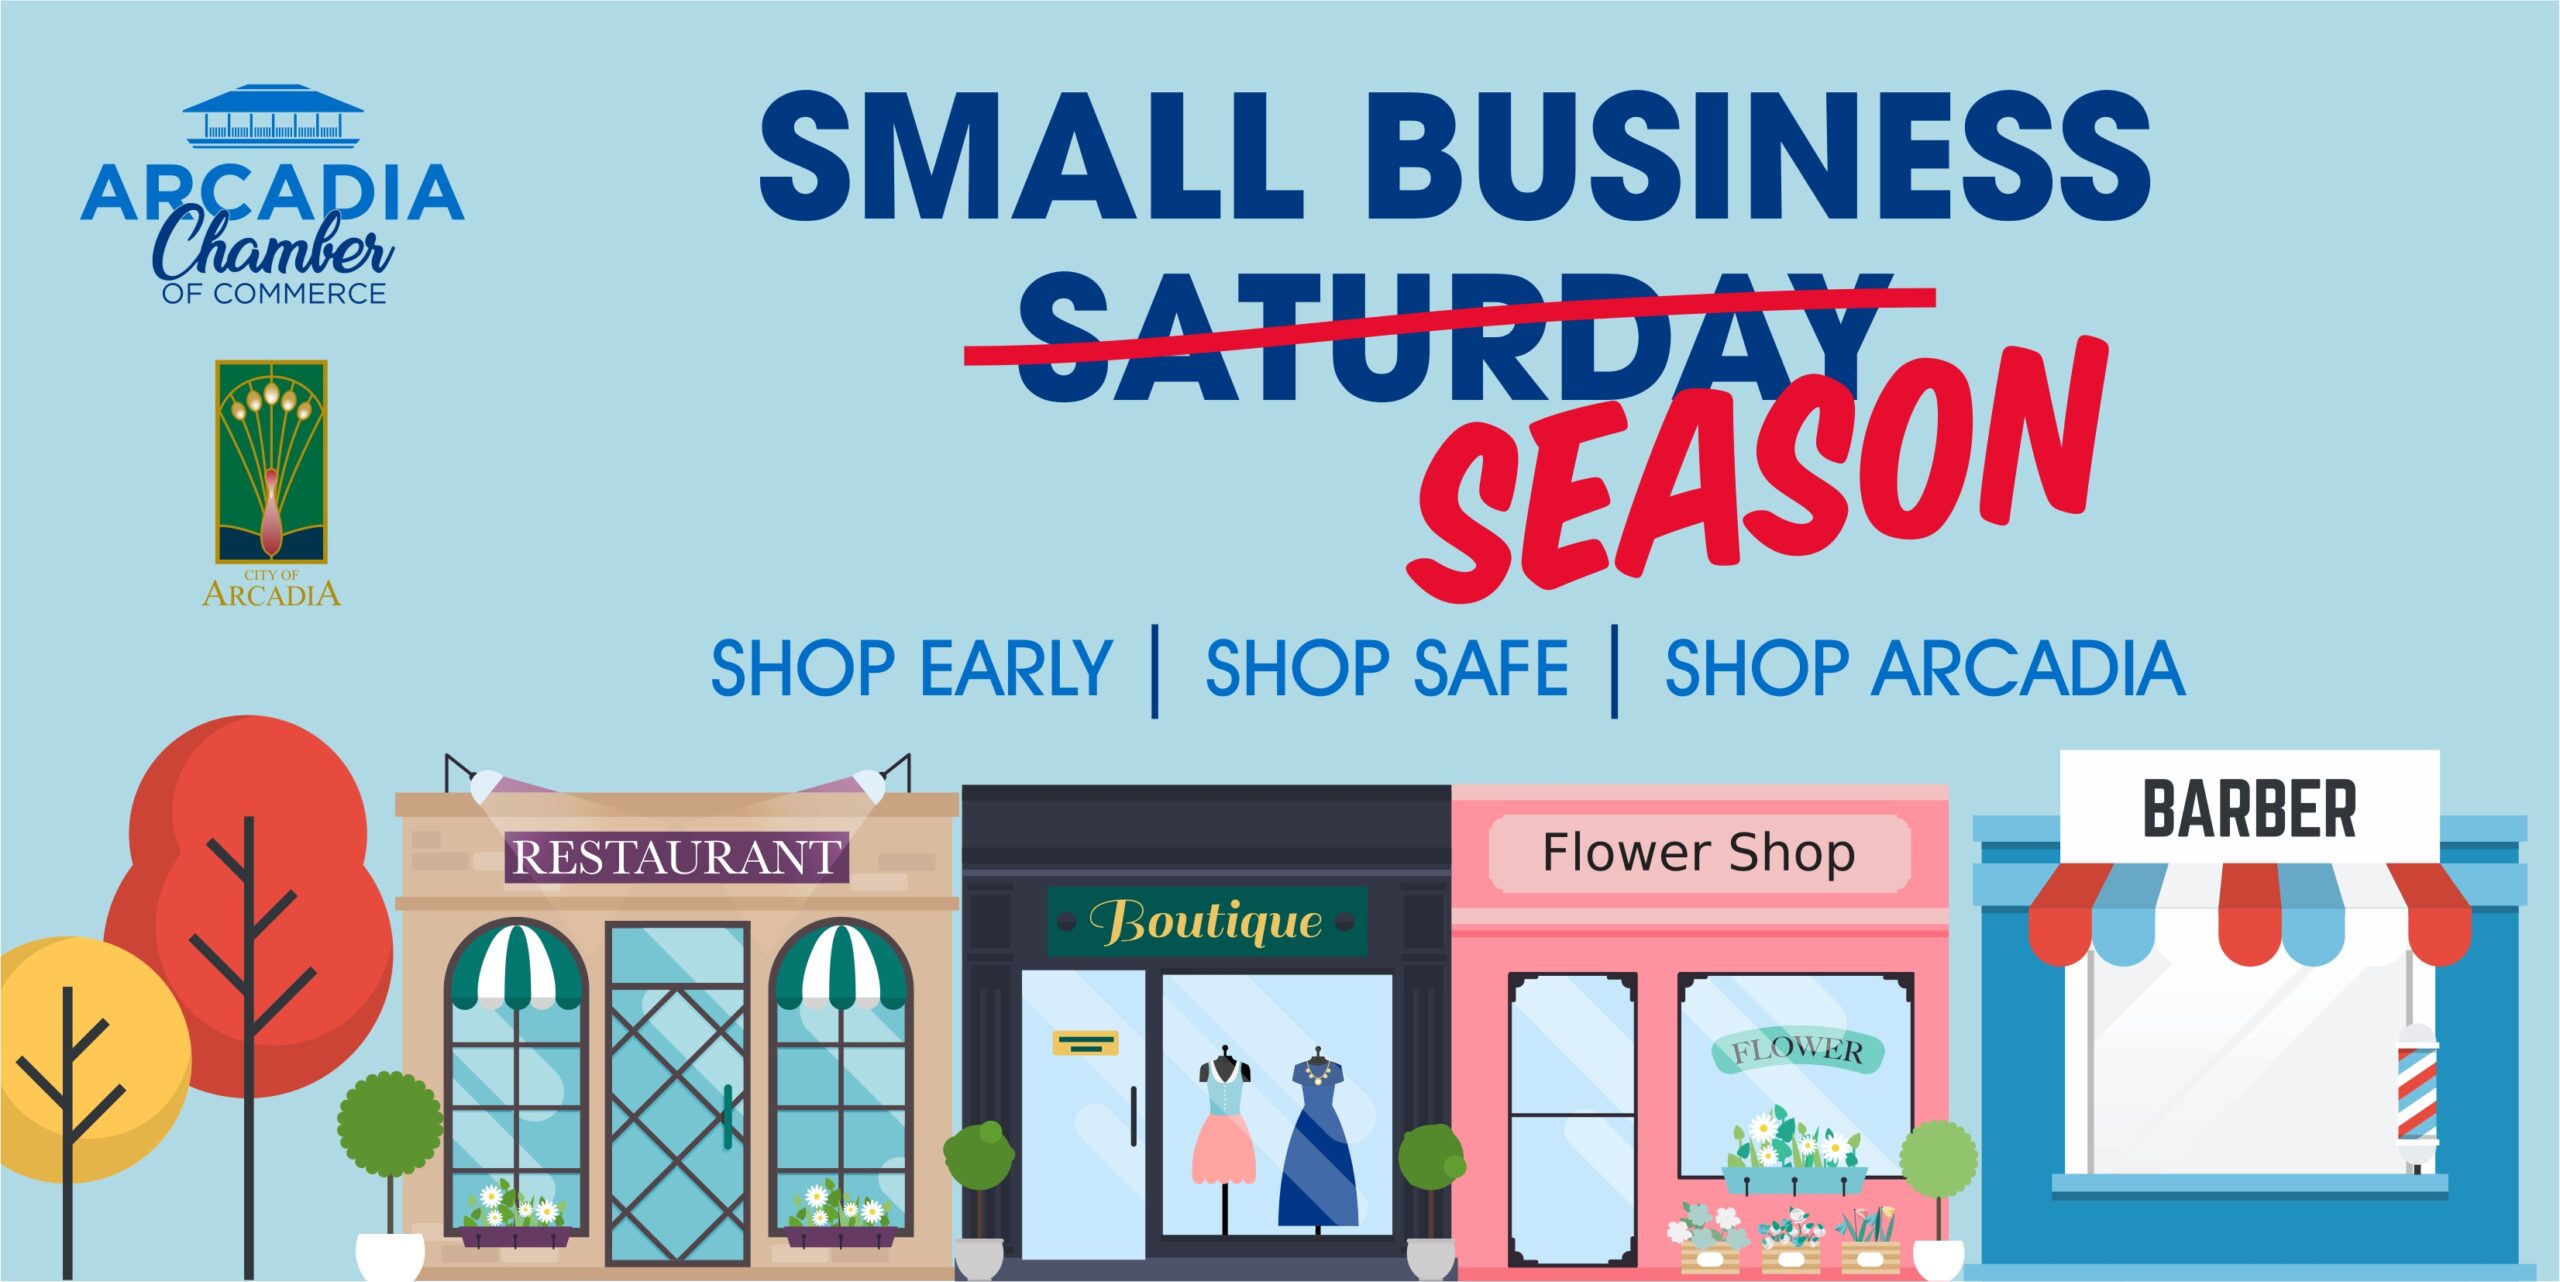 Small Business Saturday 2021 flyer